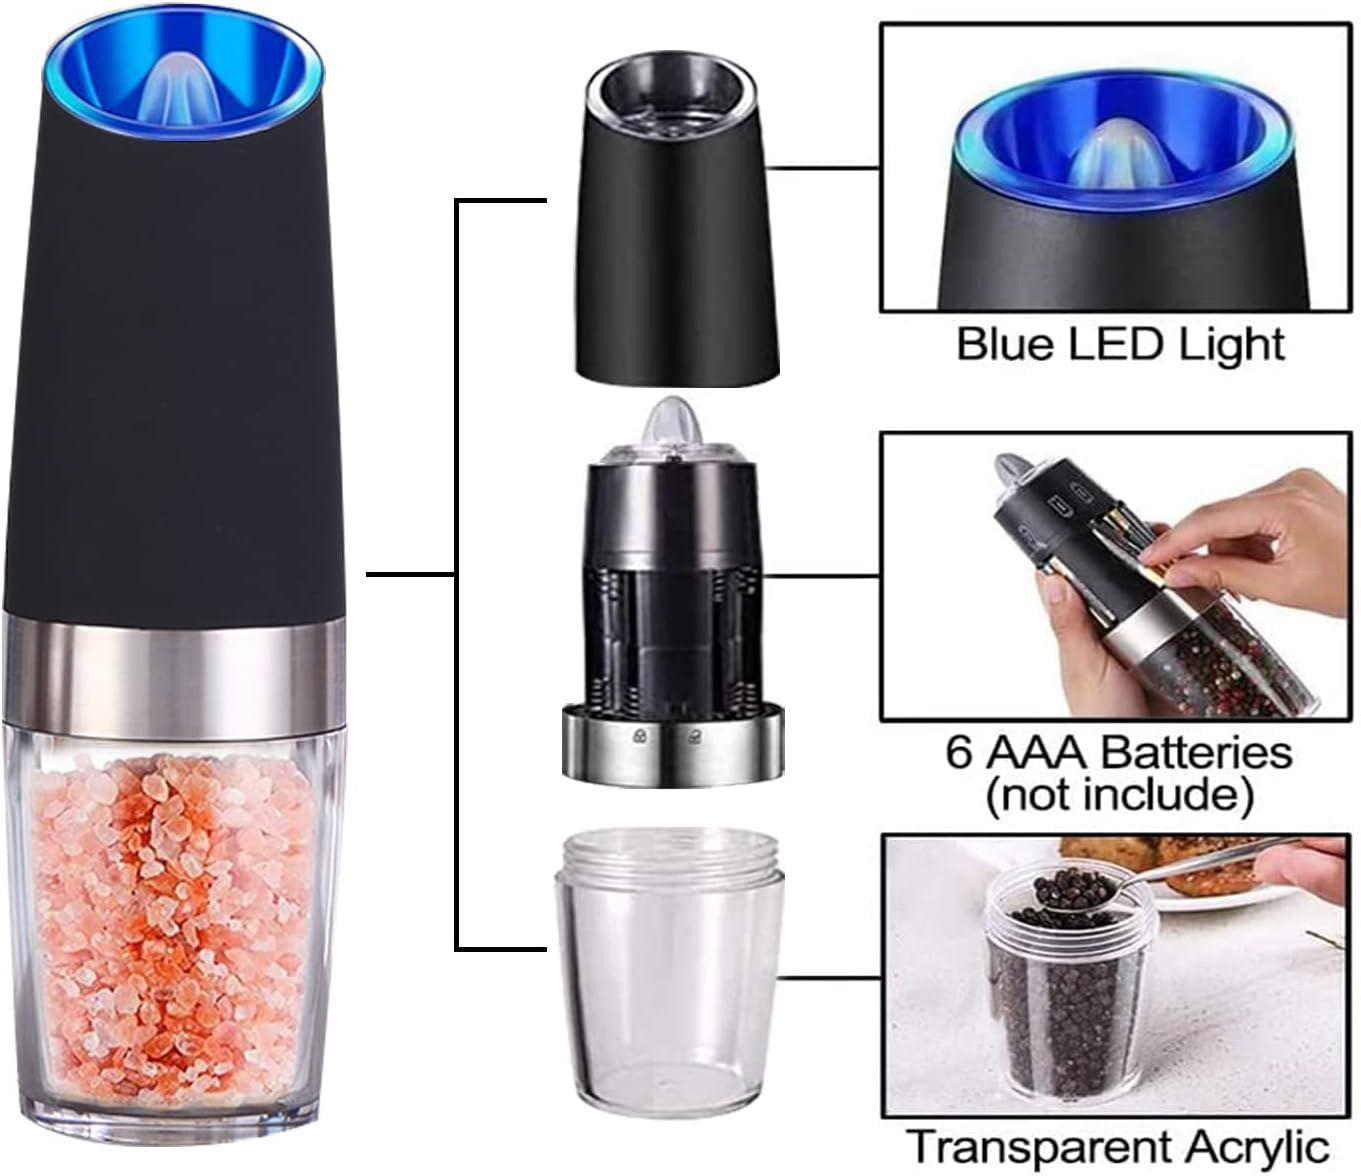 https://media.karousell.com/media/photos/products/2023/9/12/biliyer_electric_pepper_mill_a_1694482558_c4f6bf37_progressive